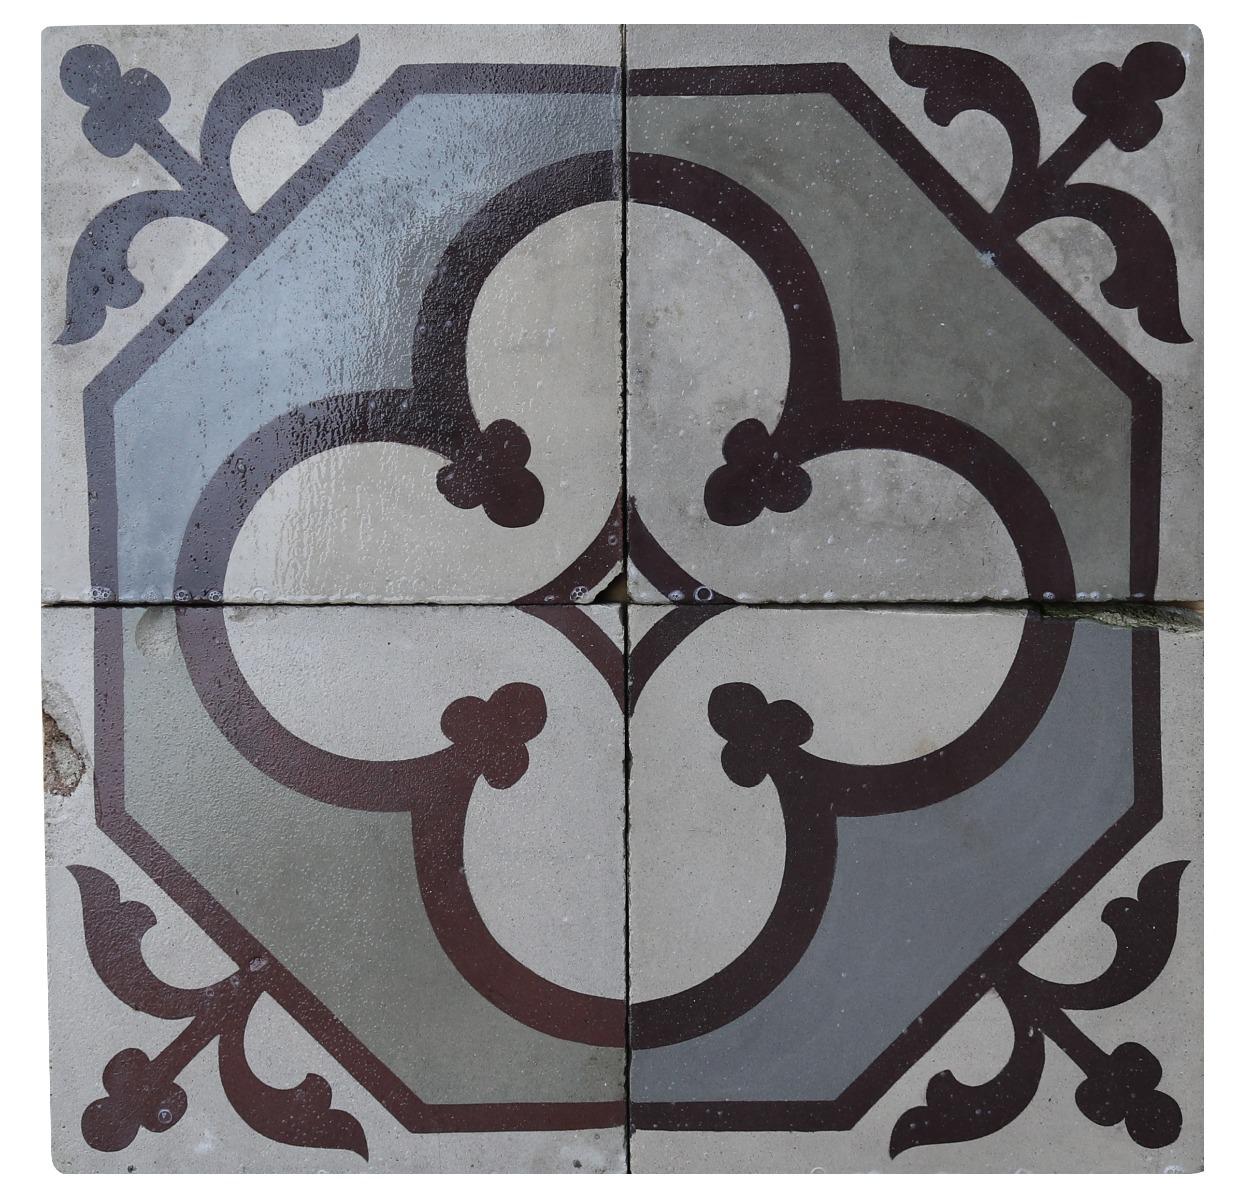 A set of 58 reclaimed encaustic cement tiles. These tiles will cover 3.6 m2 or 38 sq ft.